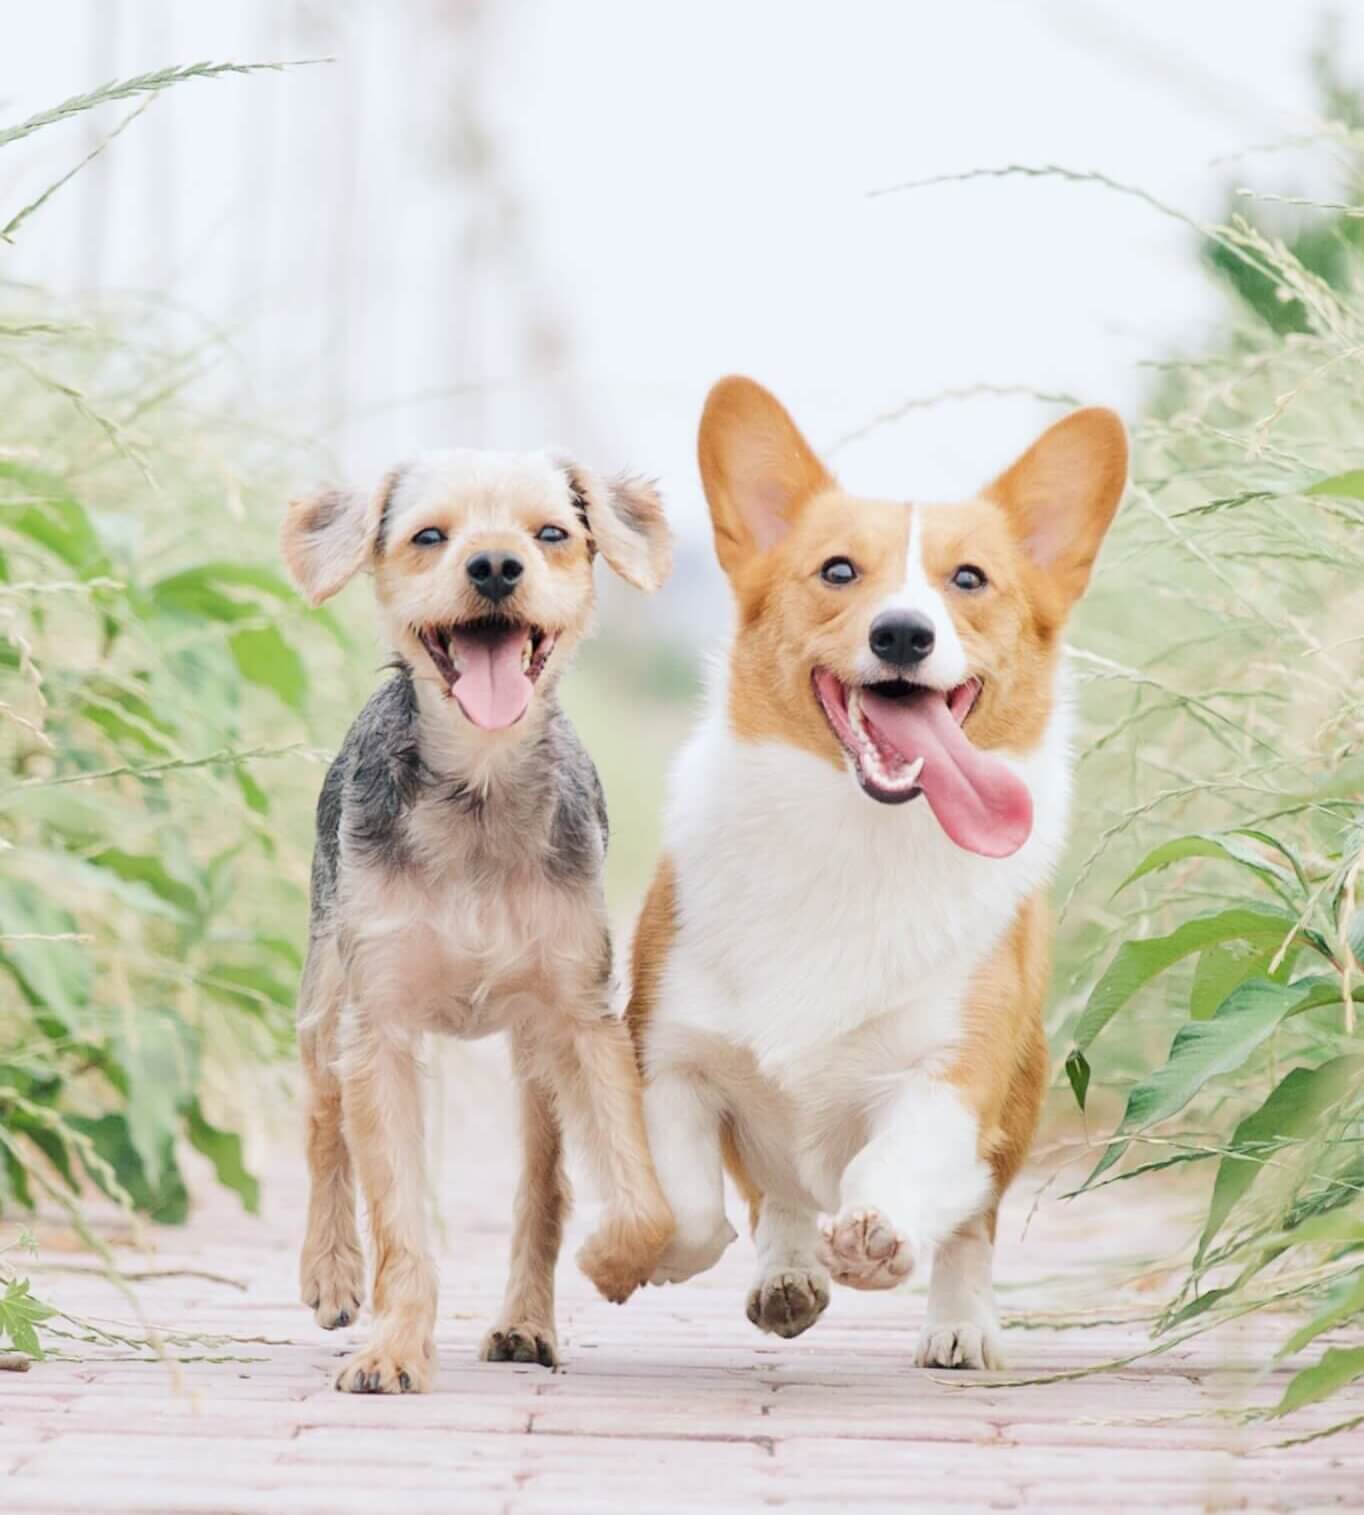 Cute dogs walking together